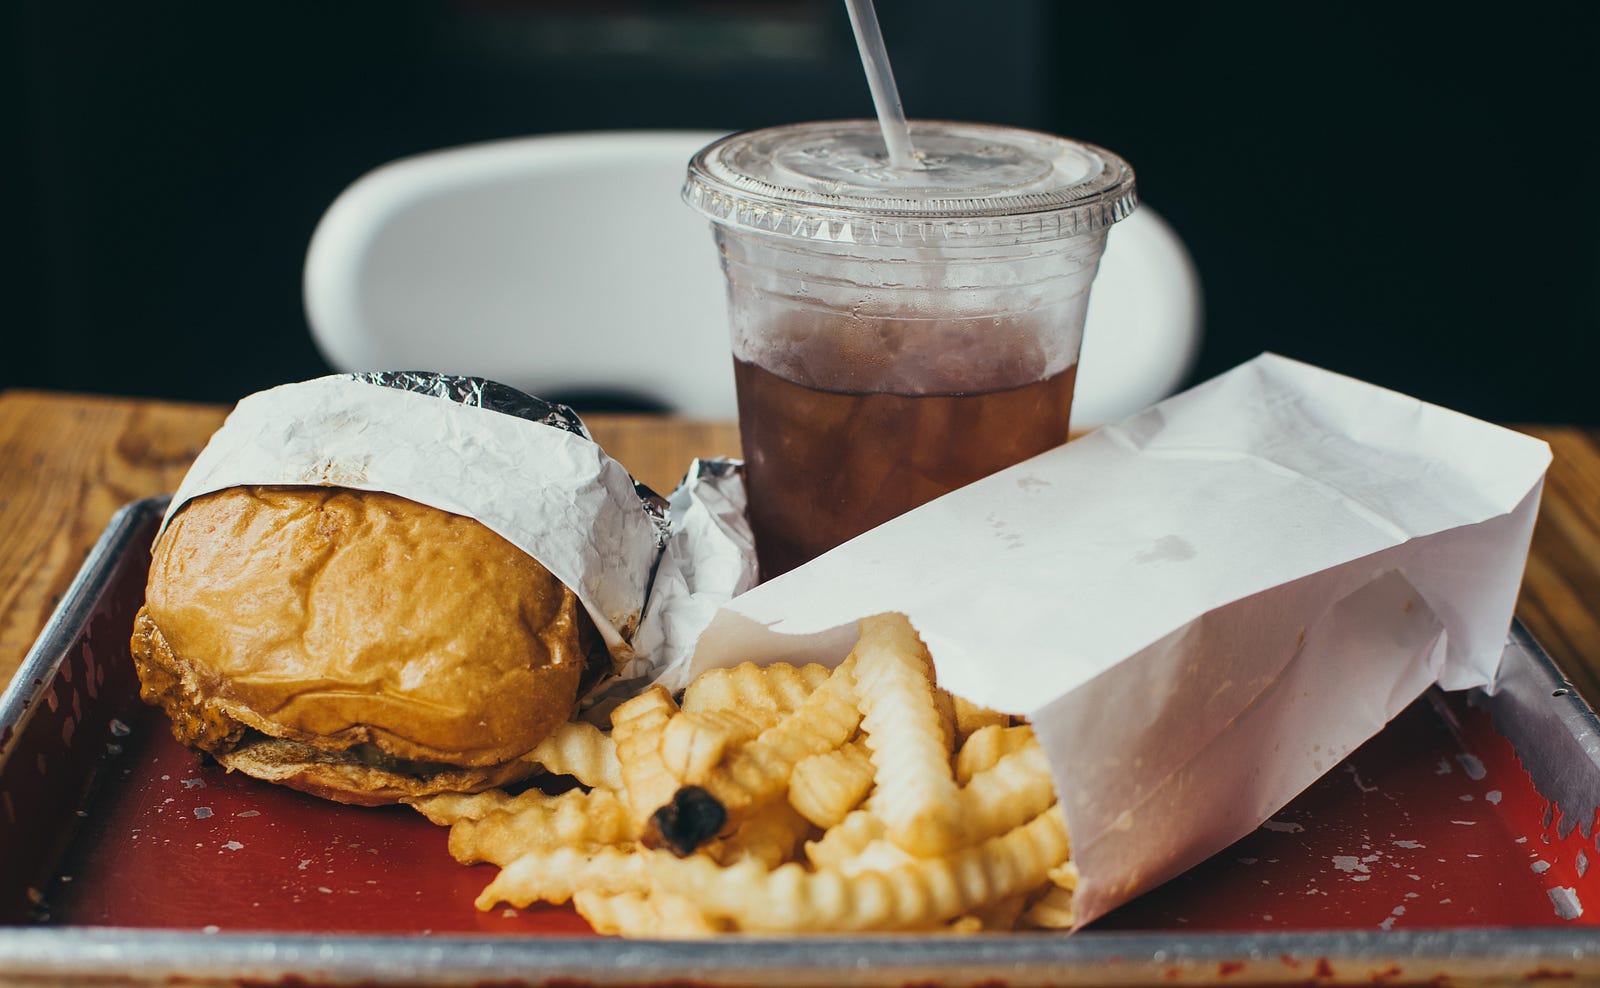 A hamburger and krinkle fries (spilling out of a small white bag). A plastic cup of coke is in the background. In type 2 diabetes, the body either doesn’t produce enough insulin or becomes resistant to the effects of insulin. Insulin is a hormone produced by the pancreas that helps regulate the absorption of glucose (sugar) into the body’s cells for energy use. When there is a lack of insulin, or the body’s cells do not respond properly, glucose builds up in the bloodstream.